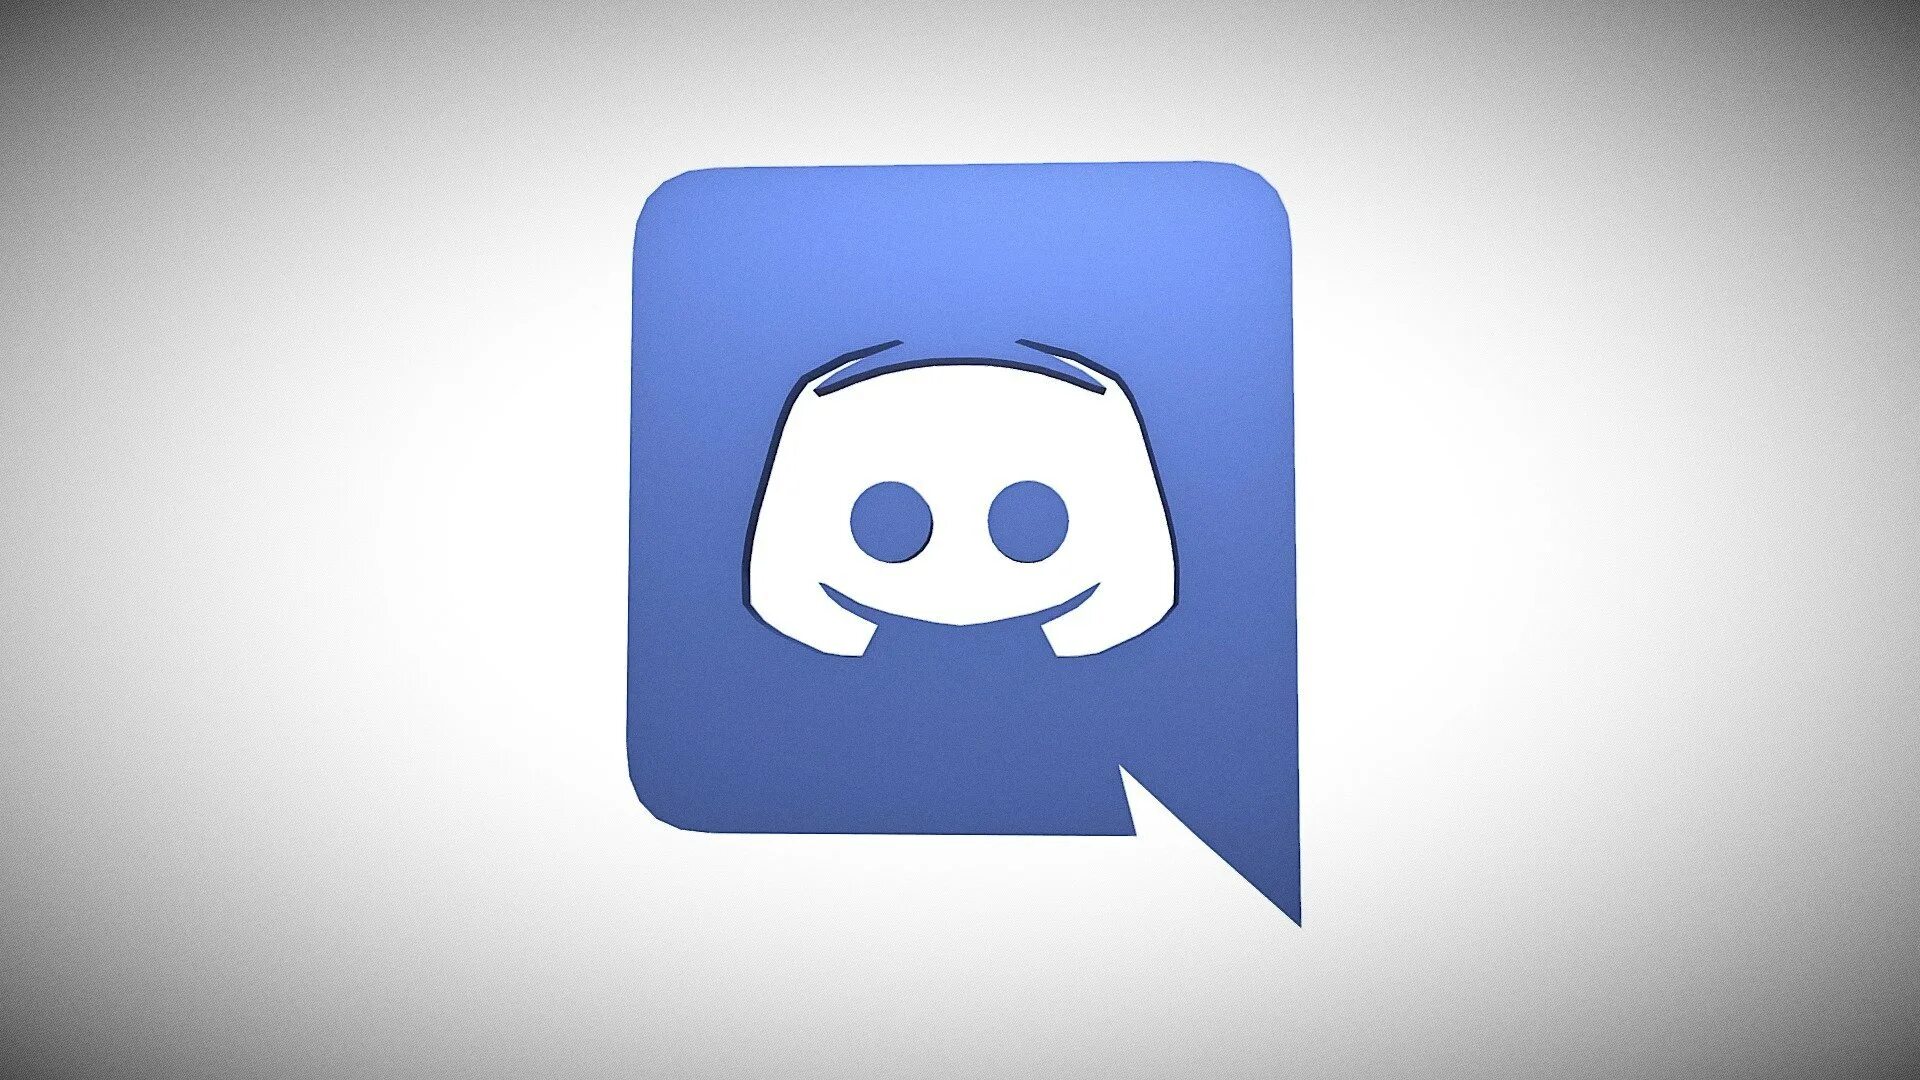 Discord png